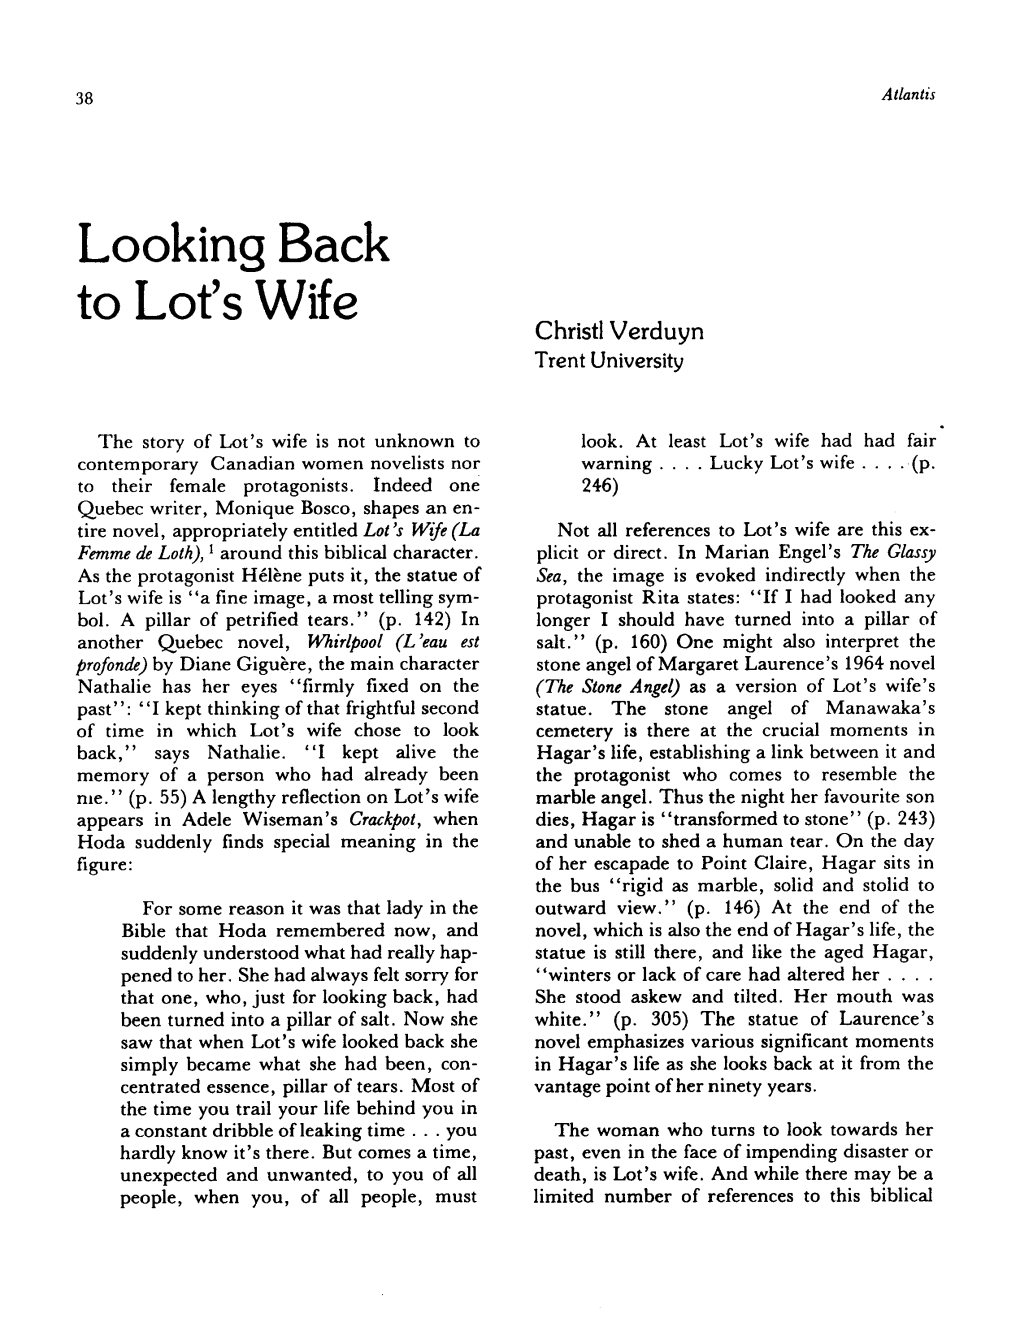 Looking Back to Lot's Wife Christl Verduyn Trent University